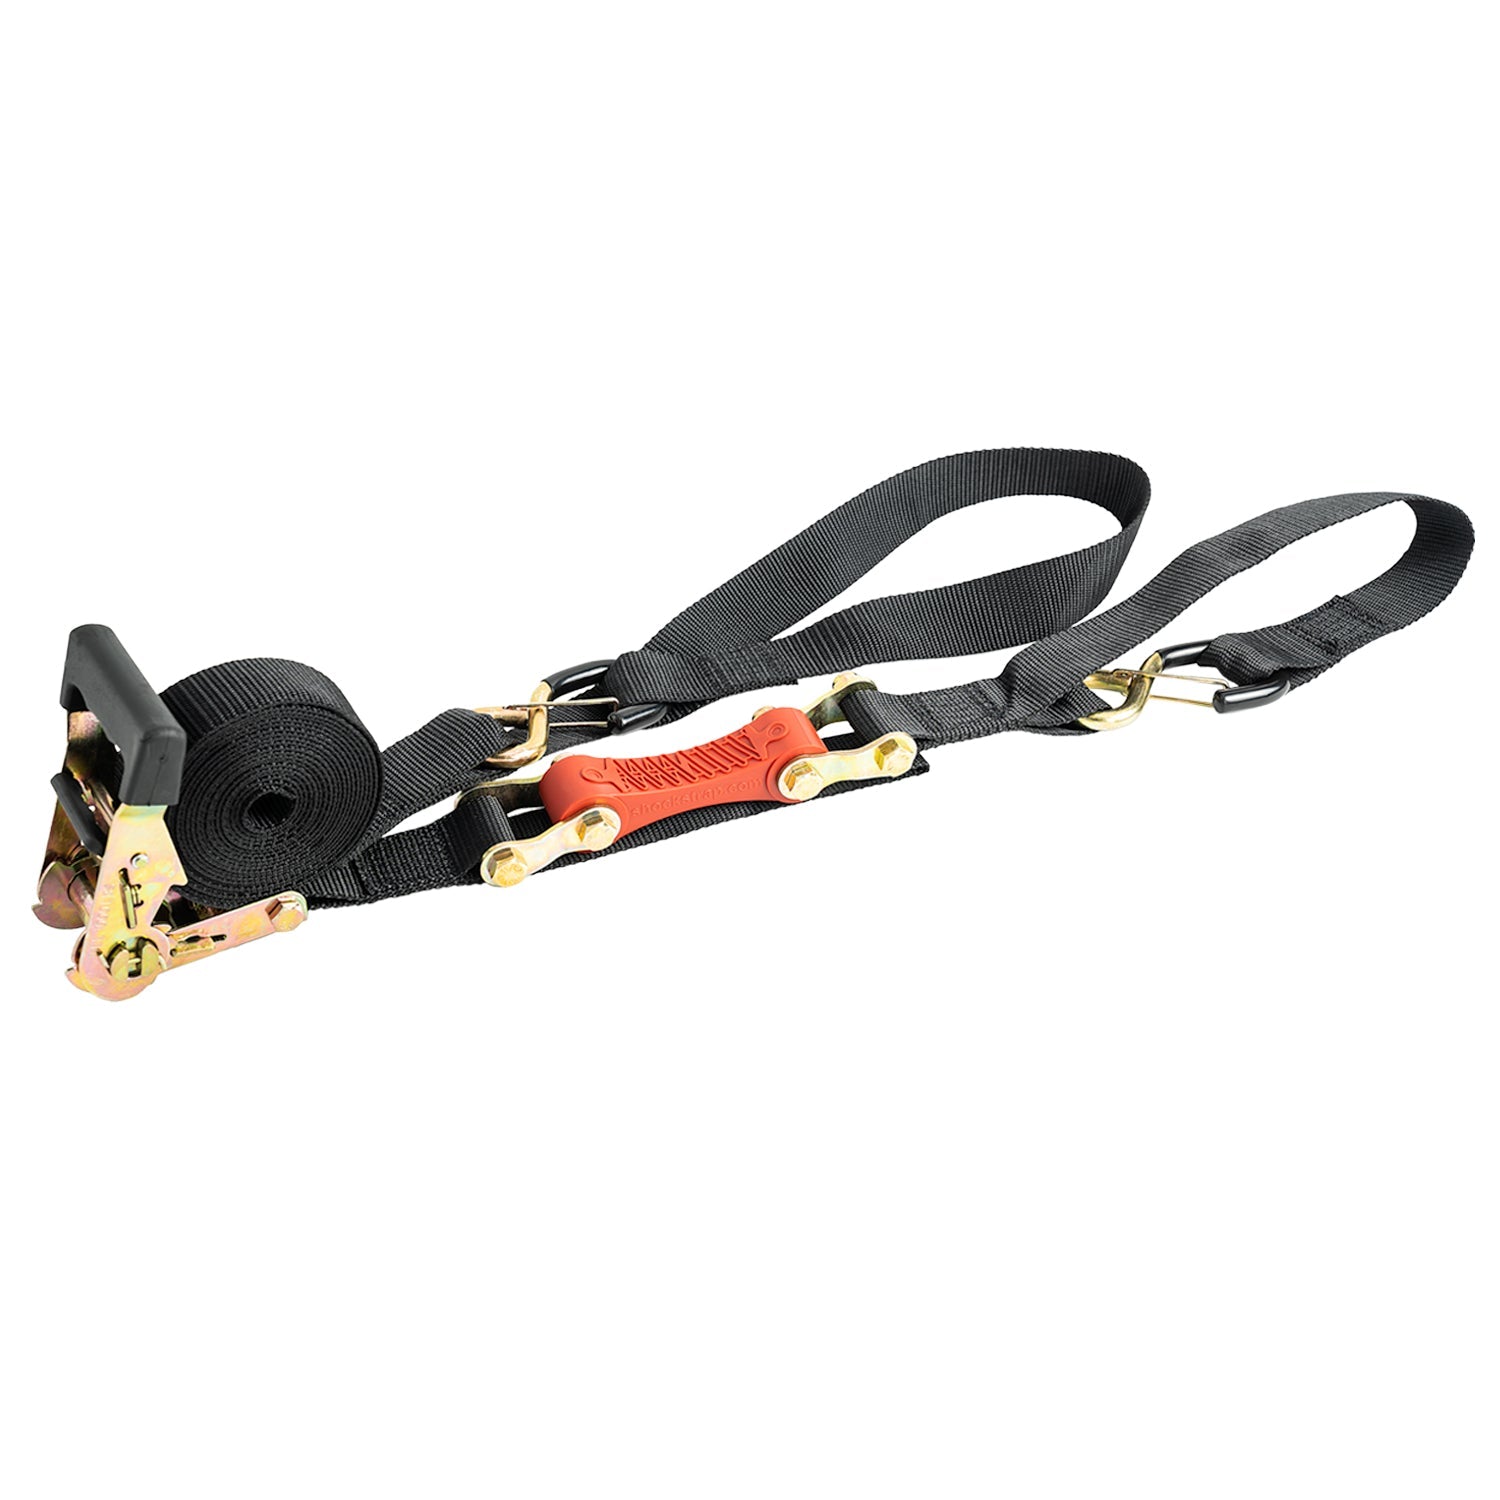 https://www.theperfectbungee.com/cdn/shop/products/7ft-x-15in-shockstrap-ratchet-strap-1k-wllshockstrapthe-perfect-bungee-shockstrap-tie-downs-532674.jpg?v=1705507501&width=1500